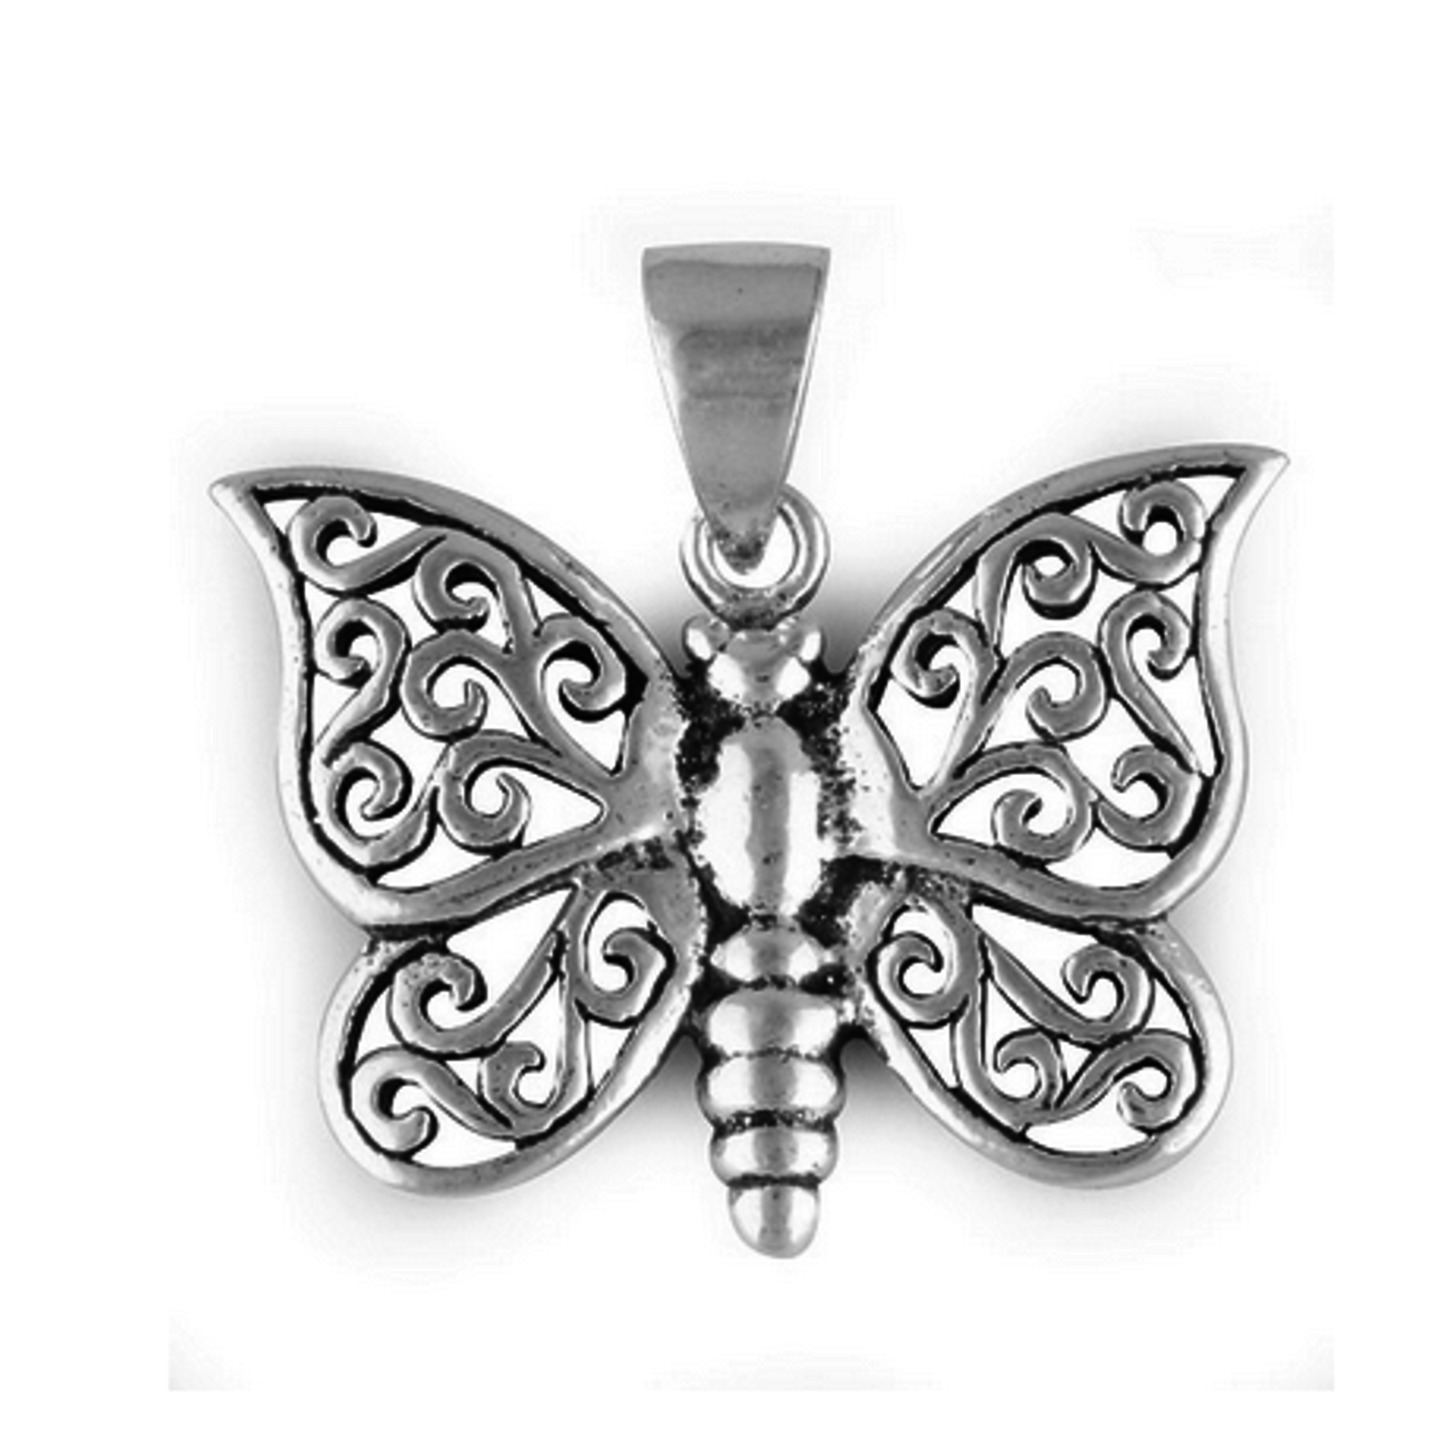 The Butterfly Pendant